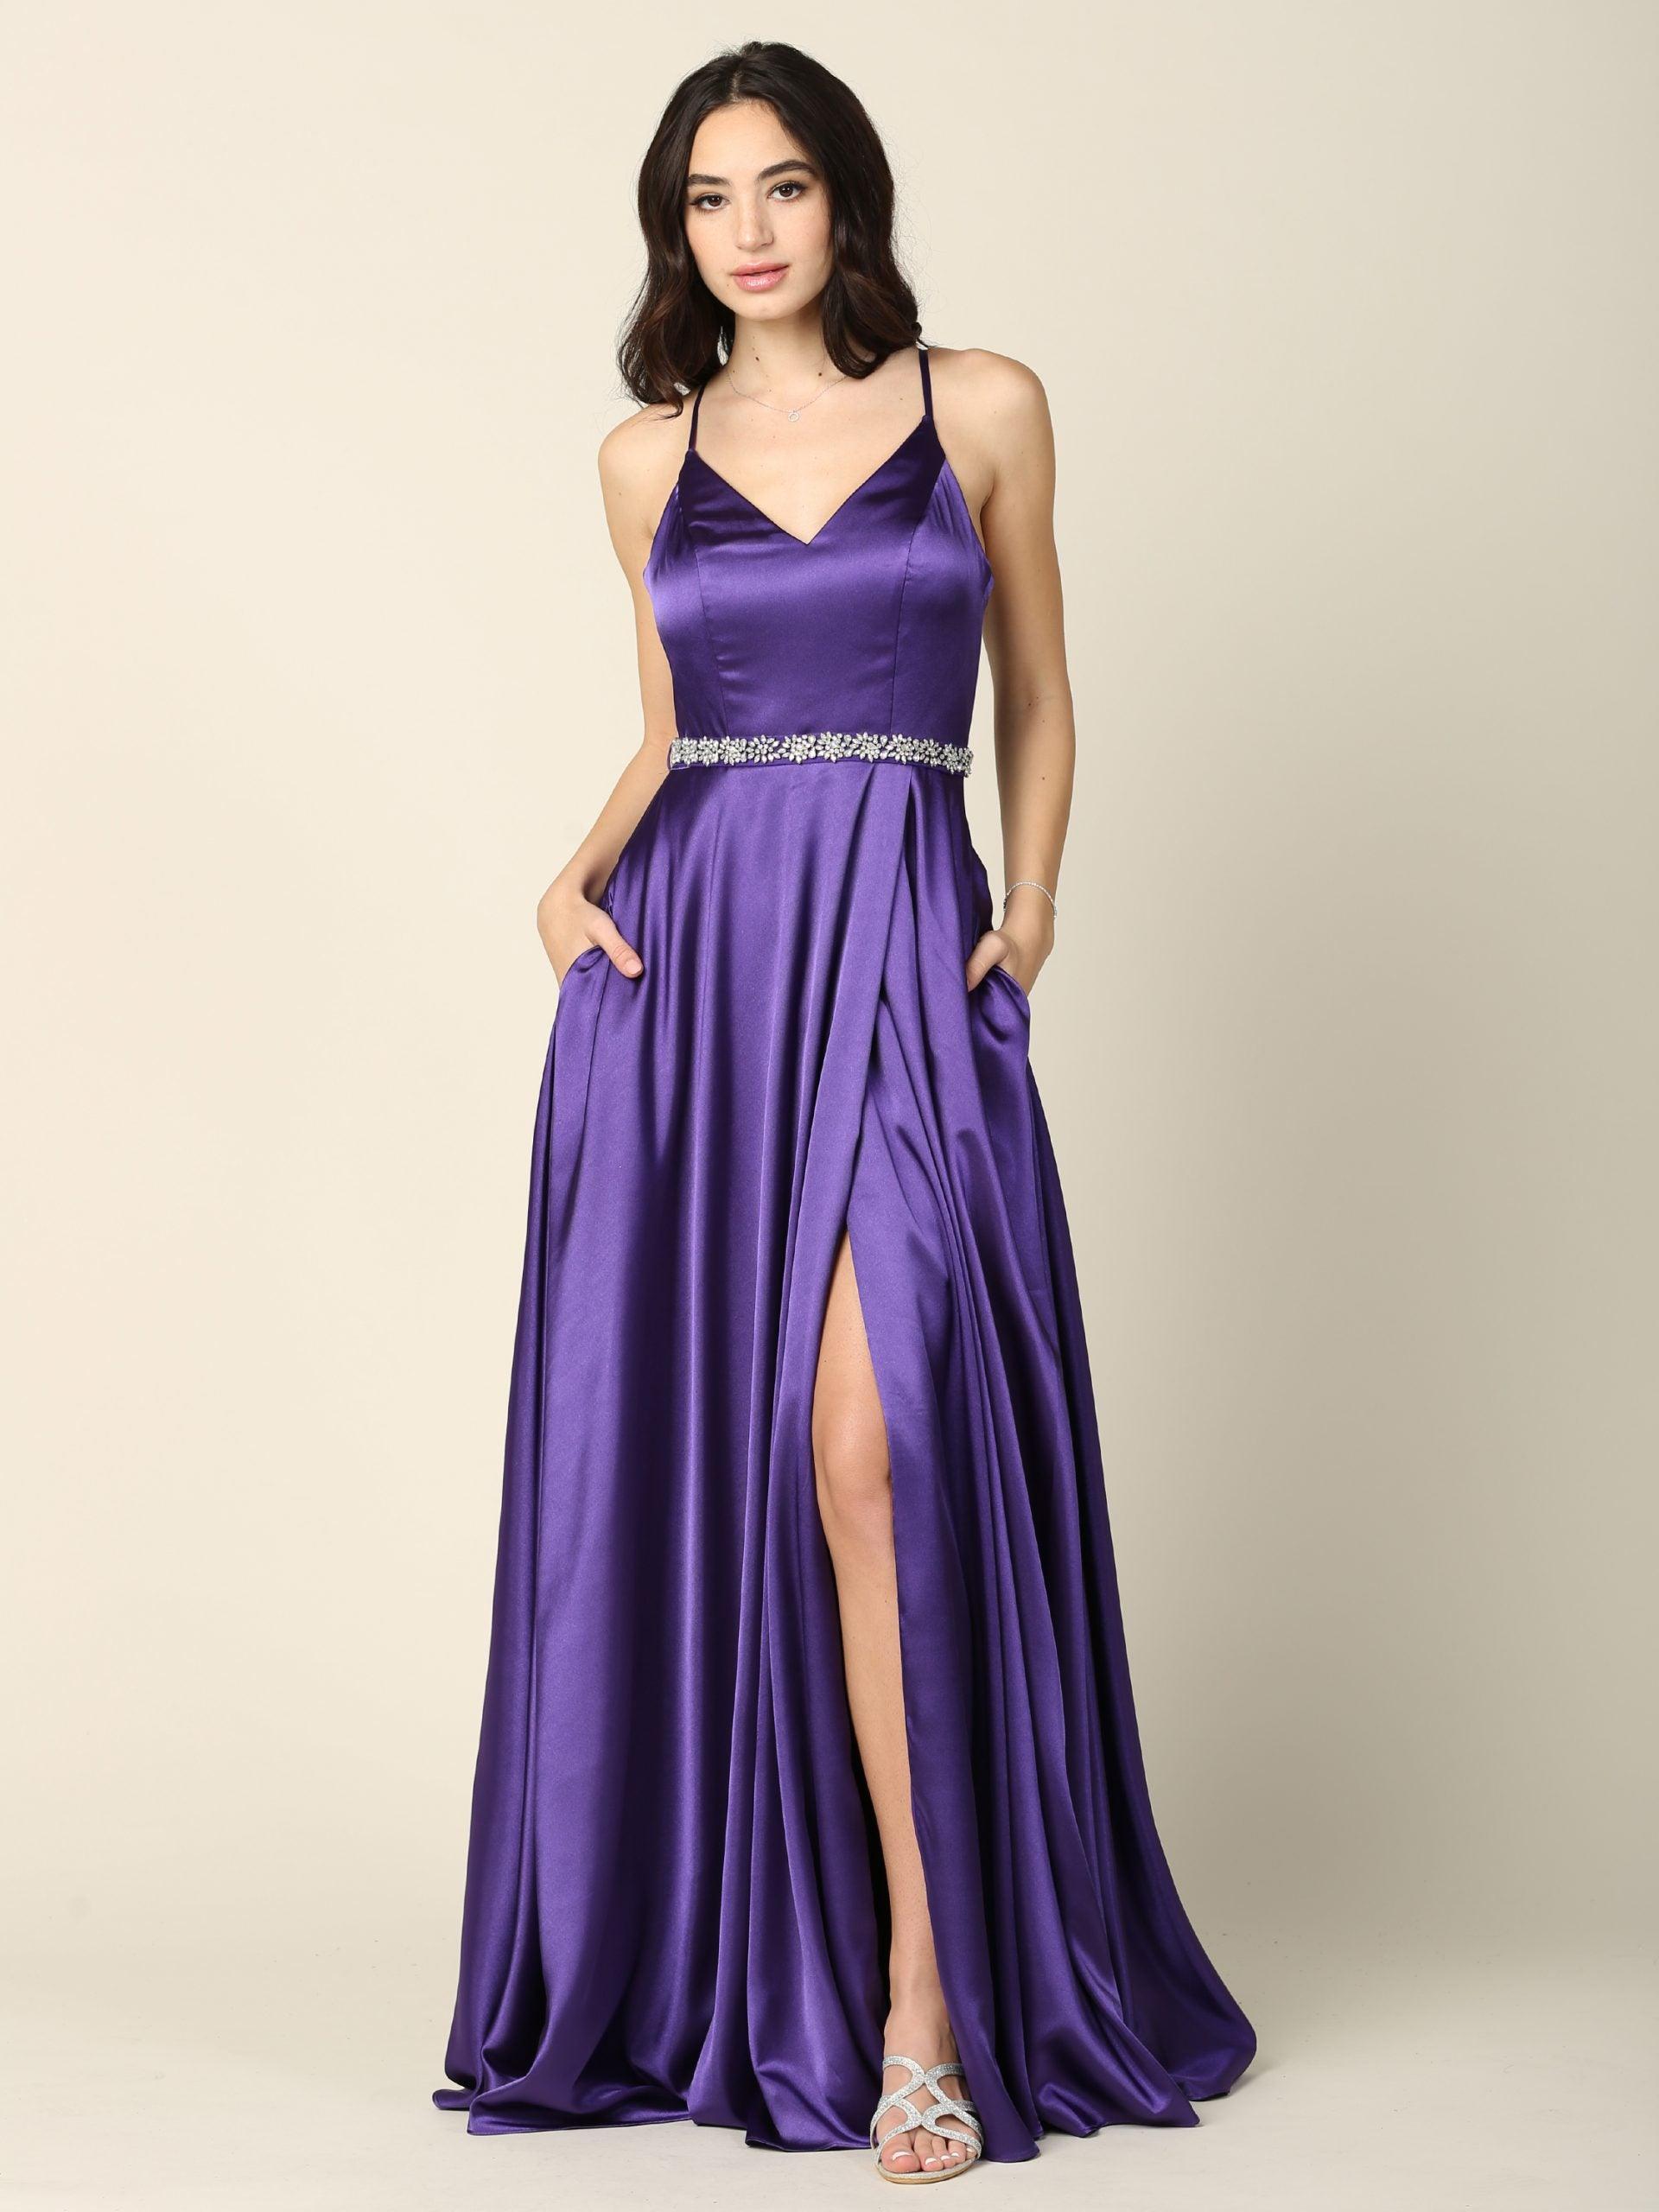 Long Formal Spaghetti Strap Bridesmaids Dress - The Dress Outlet